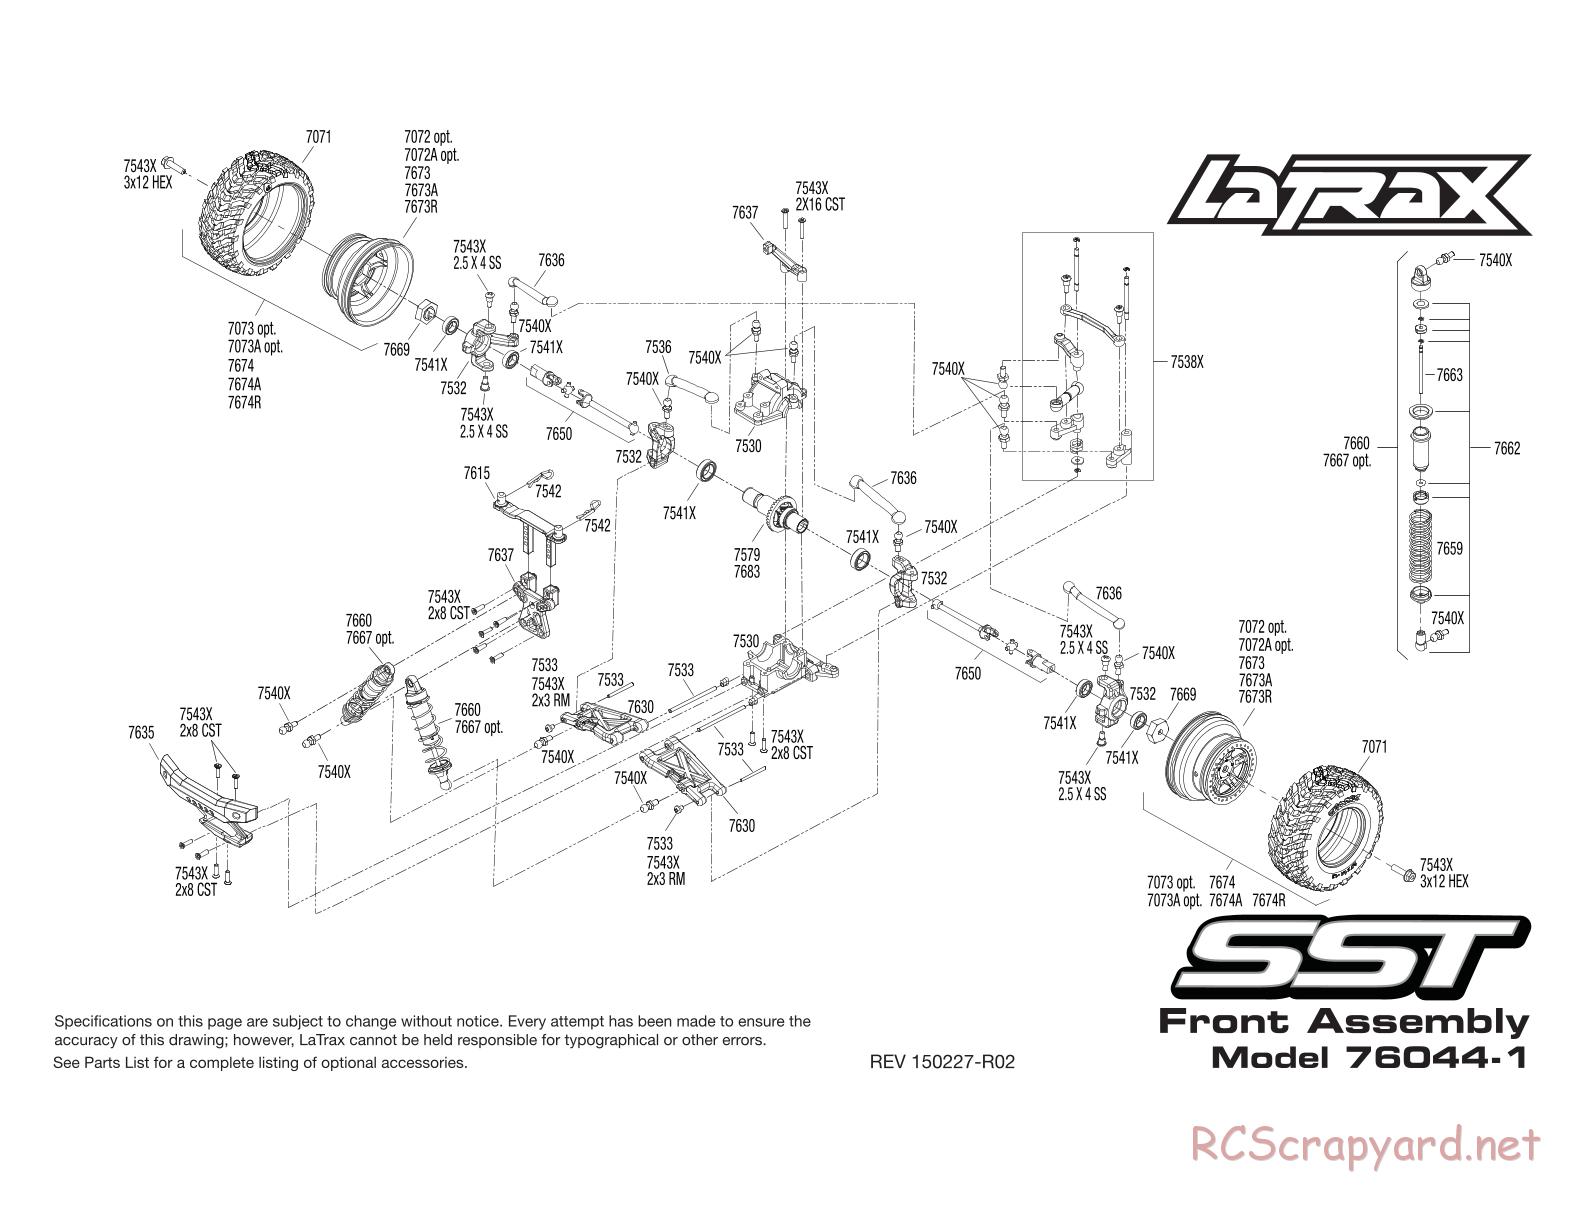 Traxxas - LaTrax SST (2014) - Exploded Views - Page 1